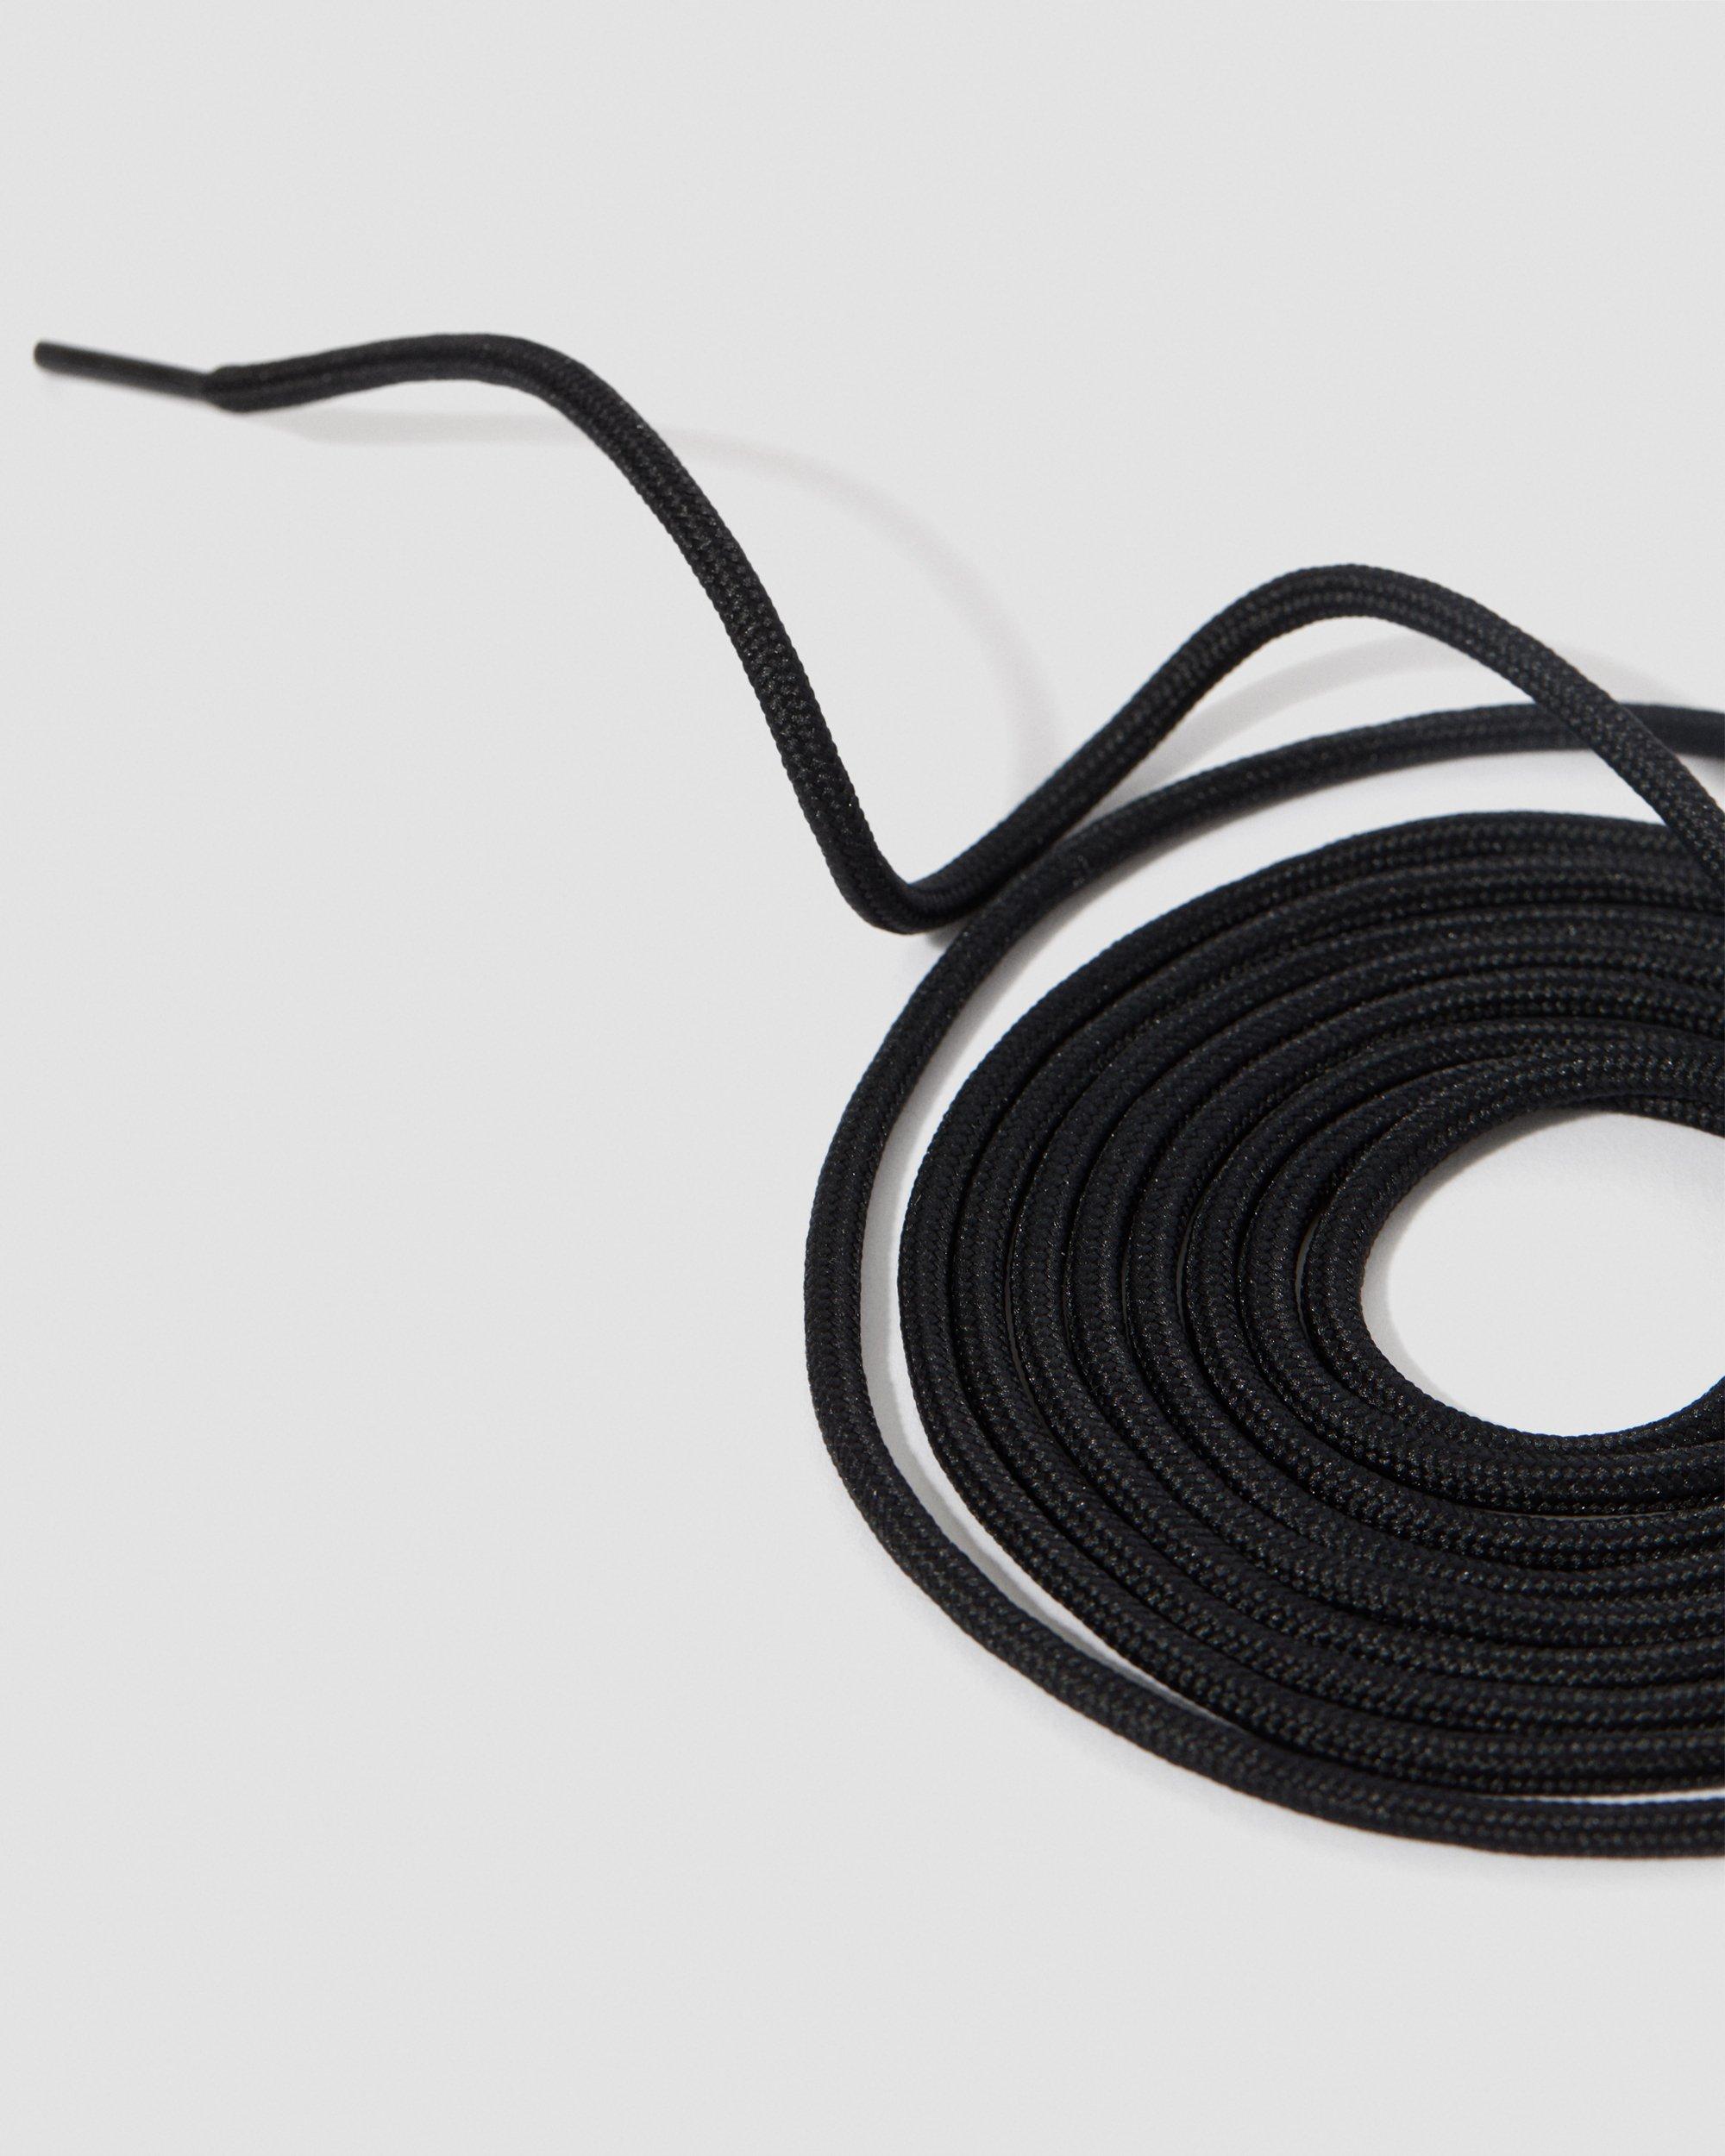 240cm Round Shoe Laces (18-20 Eye) in Black